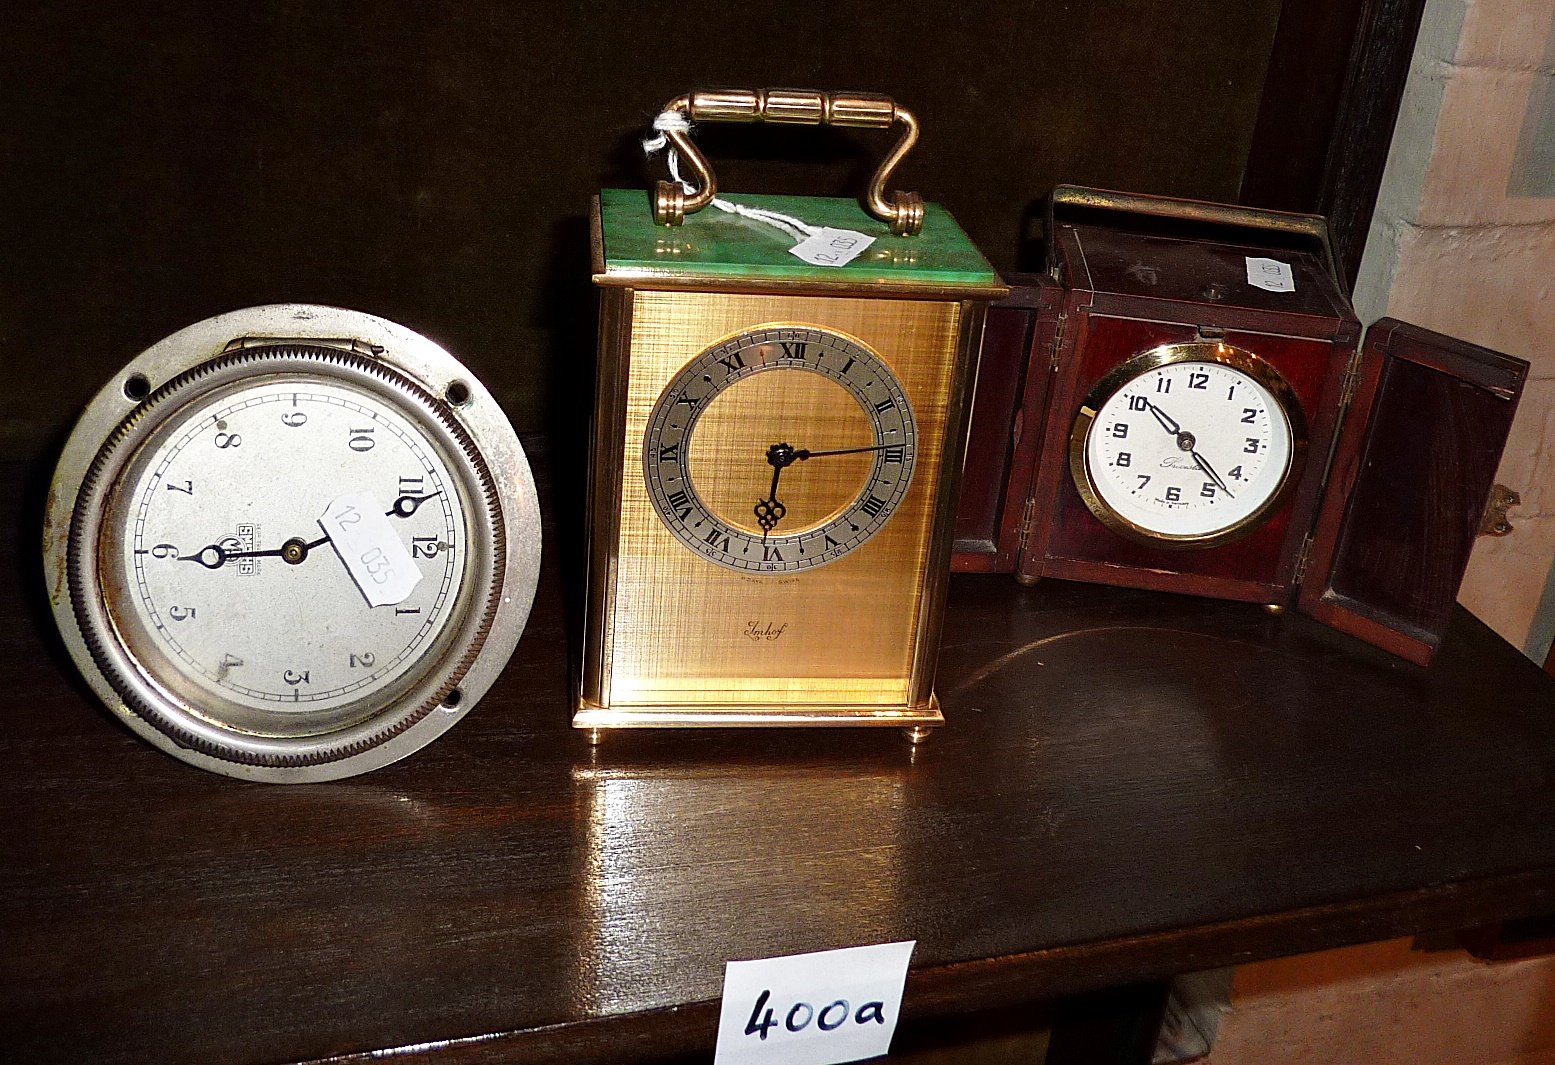 Imhof carriage clock, German Art Deco travel clock in wooden case, and a Smiths vintage automobile